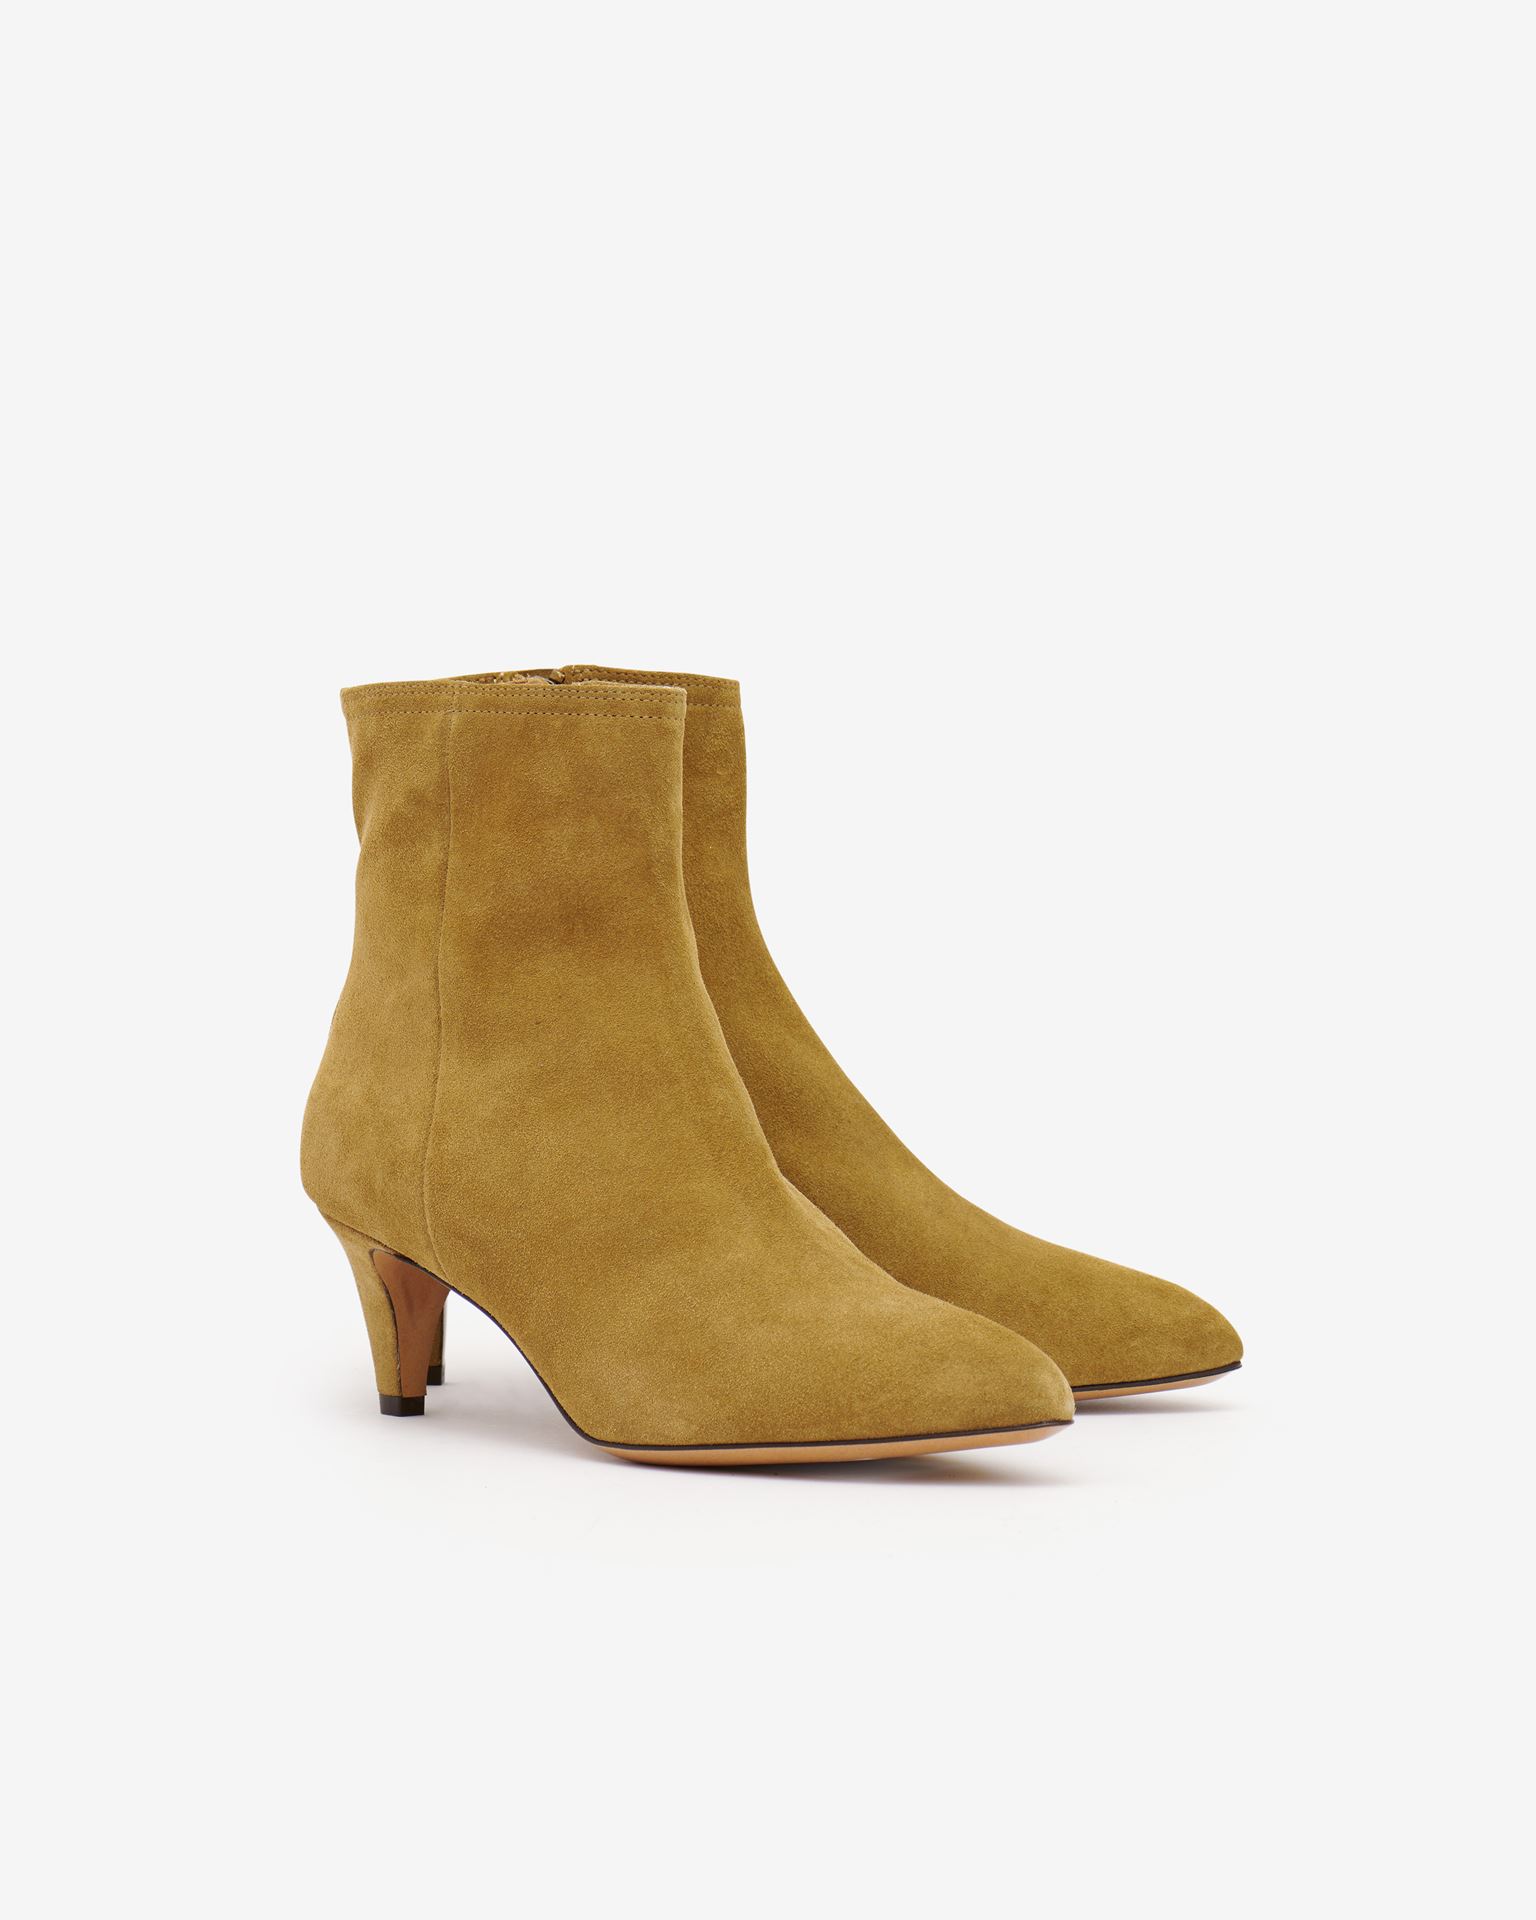 Isabel Marant, Deone Suede Leather Low Boots - Women - Brown